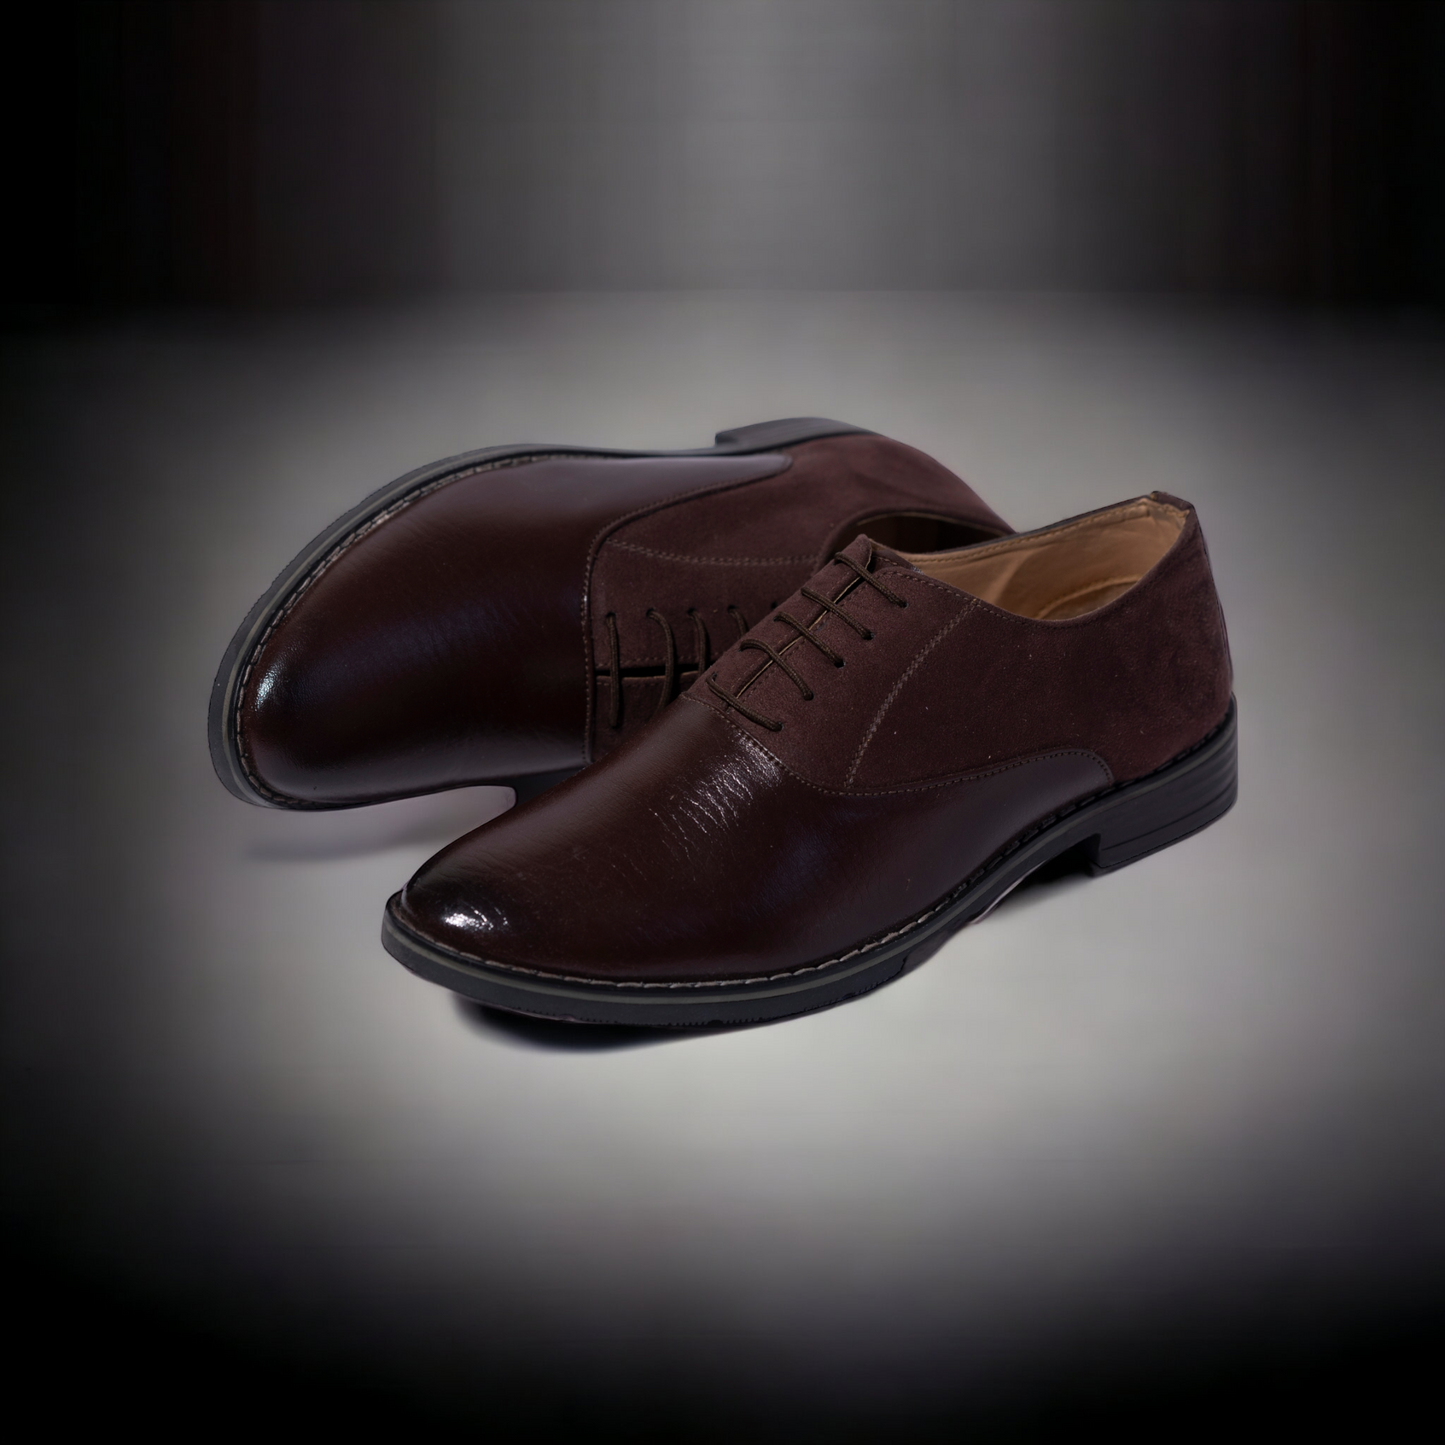 The Aurous Stride Laceup Formal Shoes - Brown